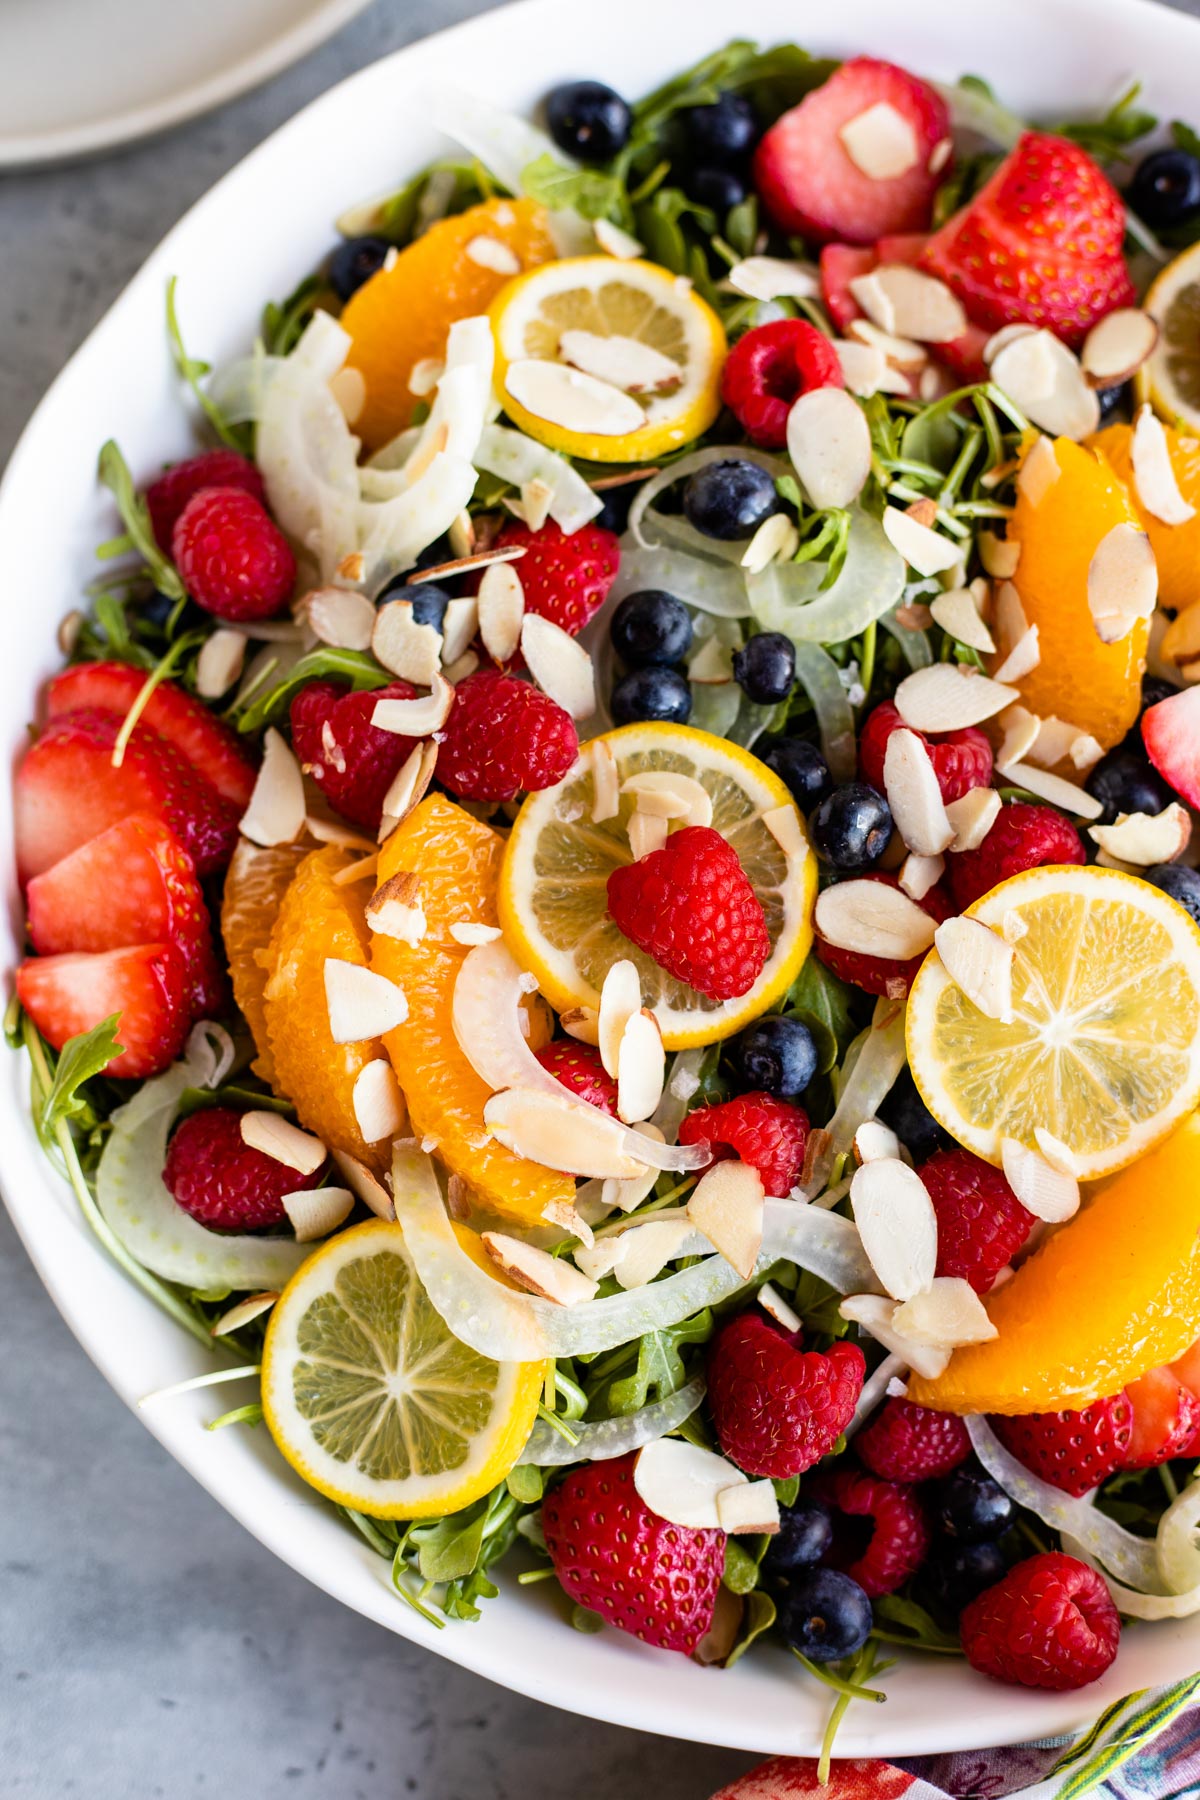 fruit and fennel salad with raspberries, strawberries, lemon, oranges and sliced almonds.